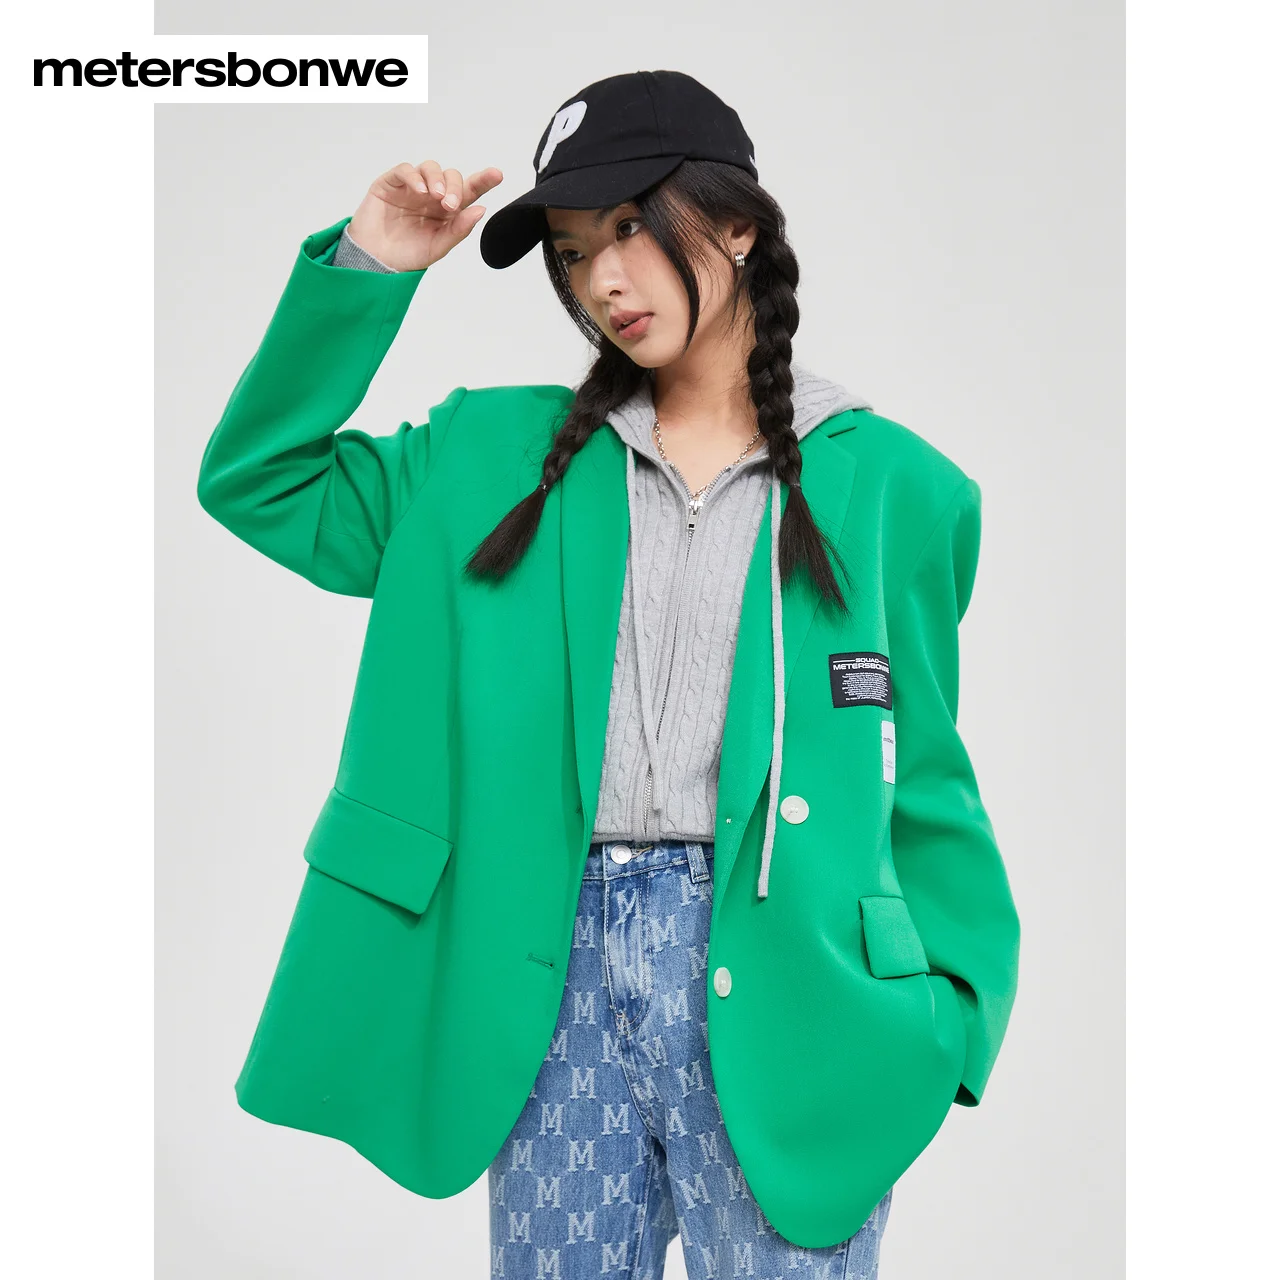 Metersbonwe  Blazers Women Spring Autumn New Fashion Ladies Suit Casual Loose Cardigan Coat Green Outside Green Suits Tops Brand